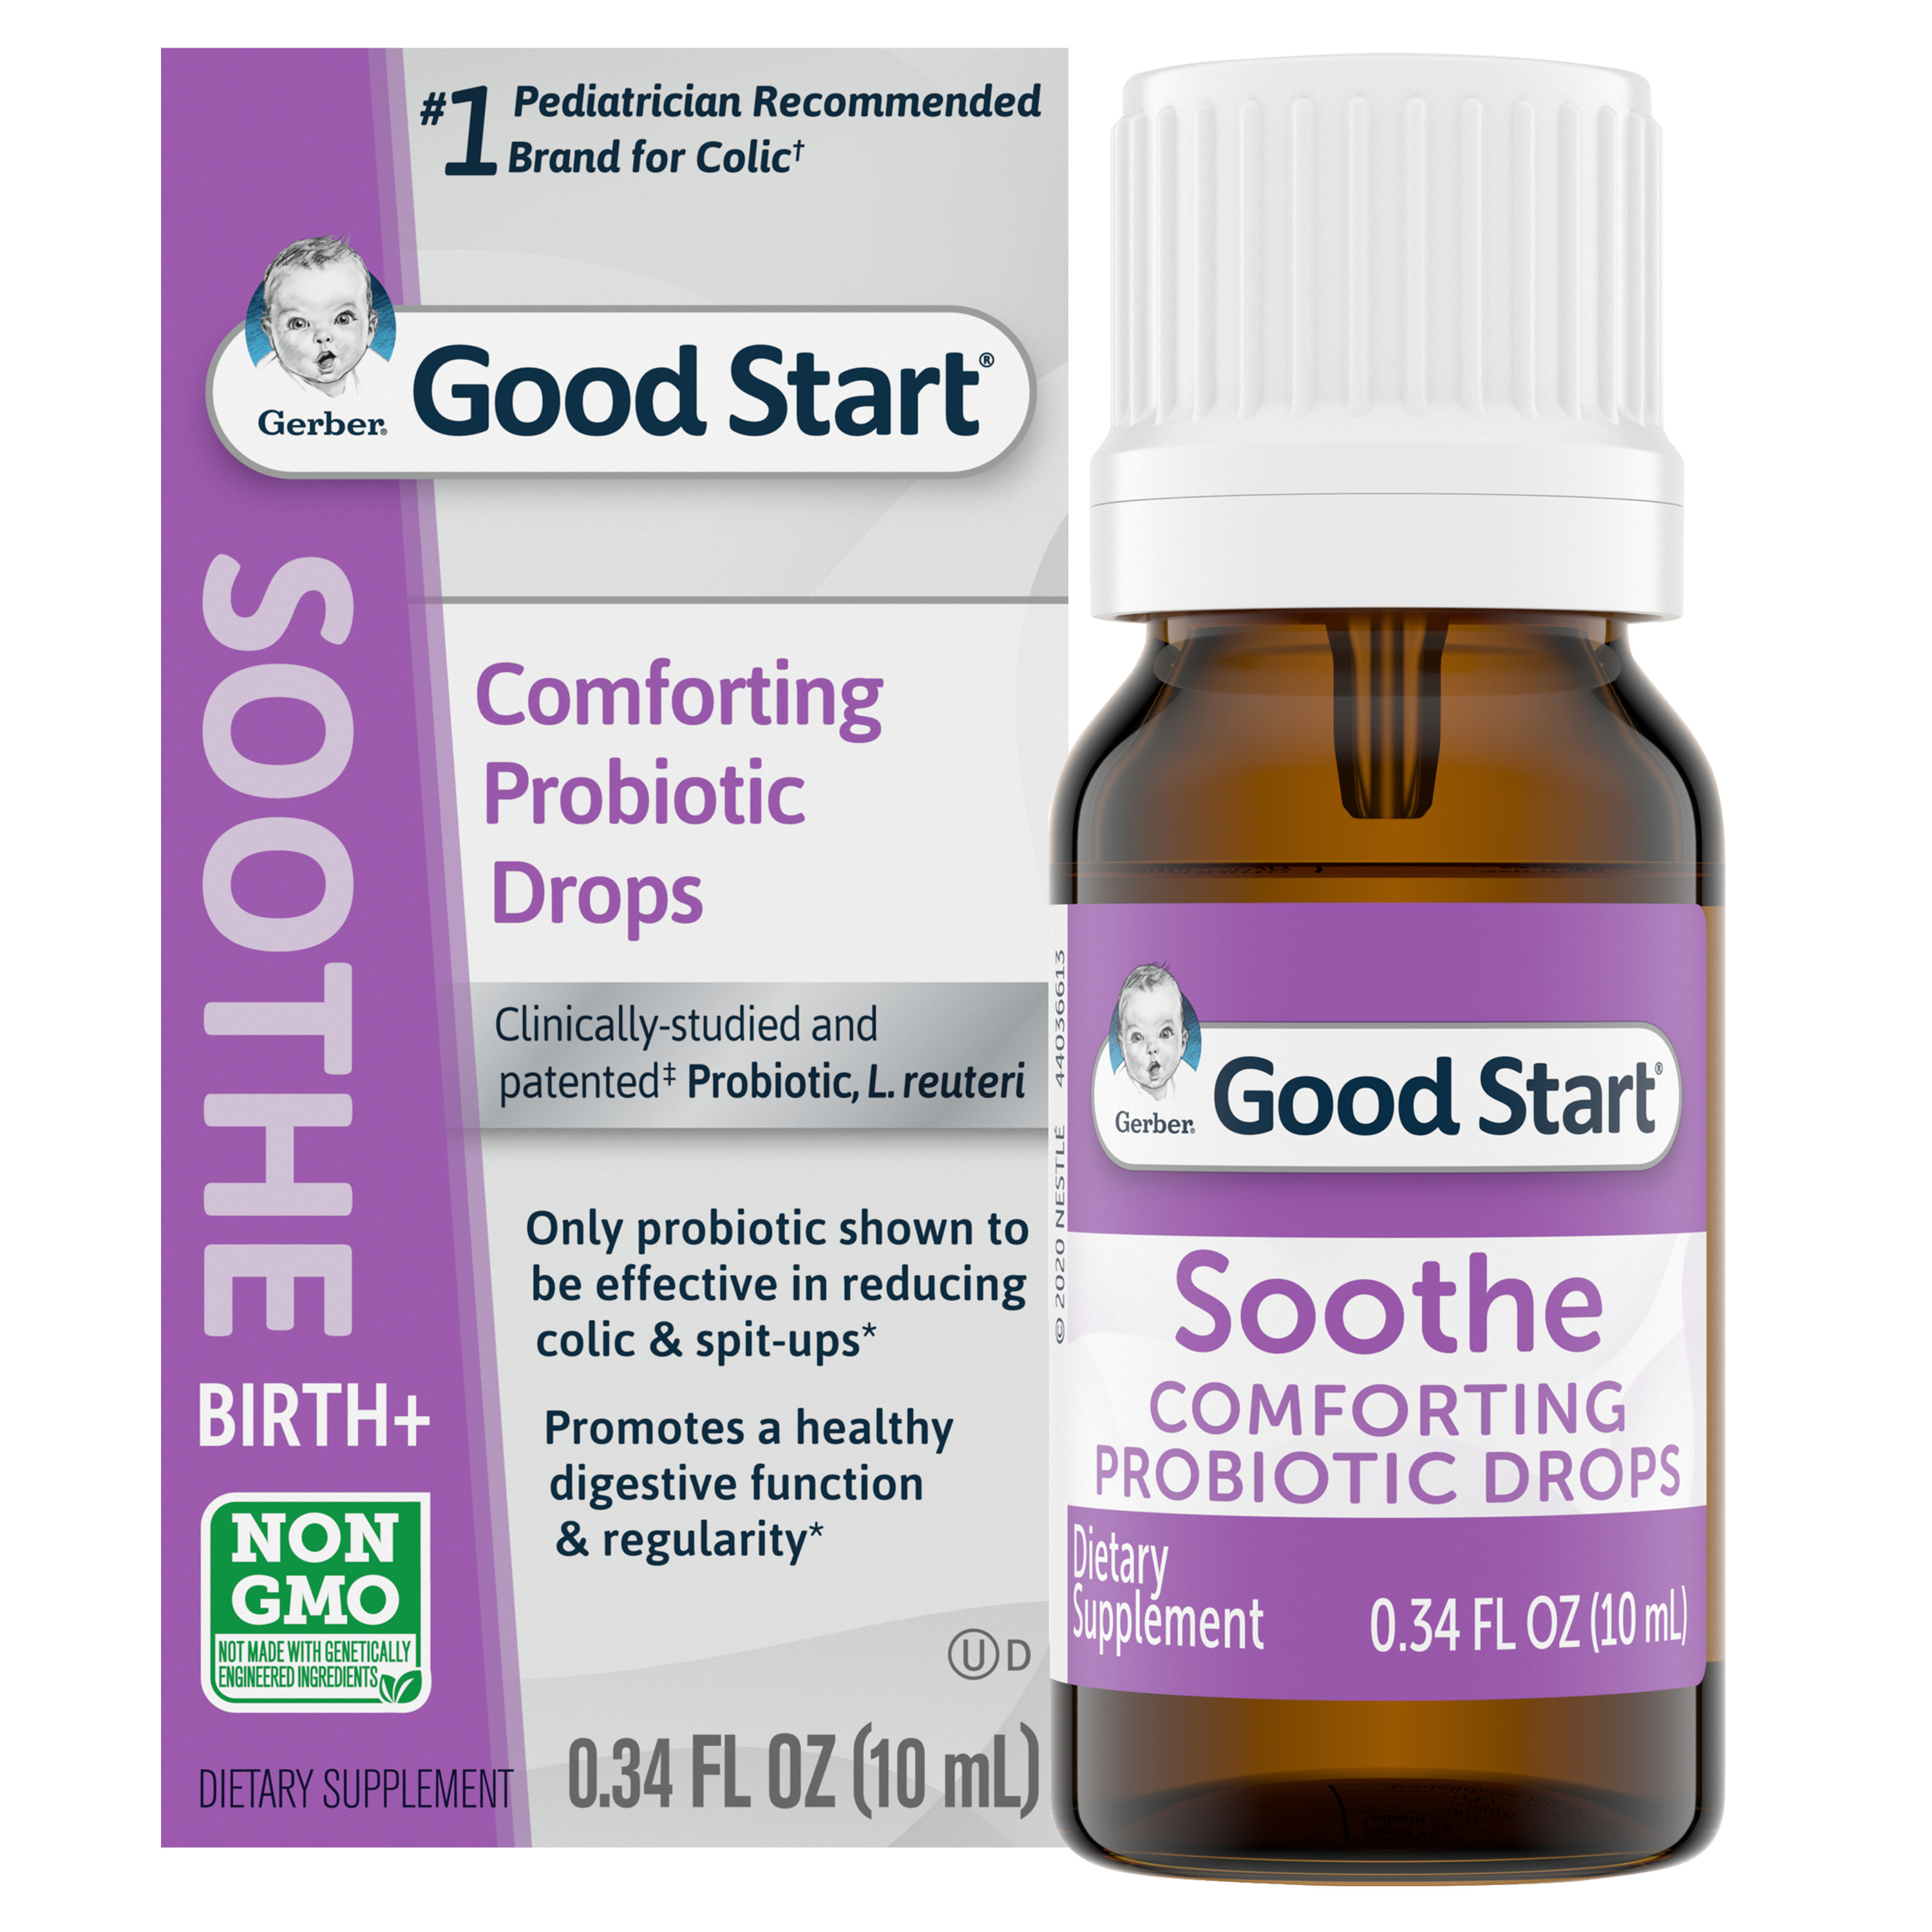 Gerber Good Start Soothe Comforting Baby Probiotic Drops for Dietary Supplement, 0.34 fl. oz. Bottle - image 1 of 8